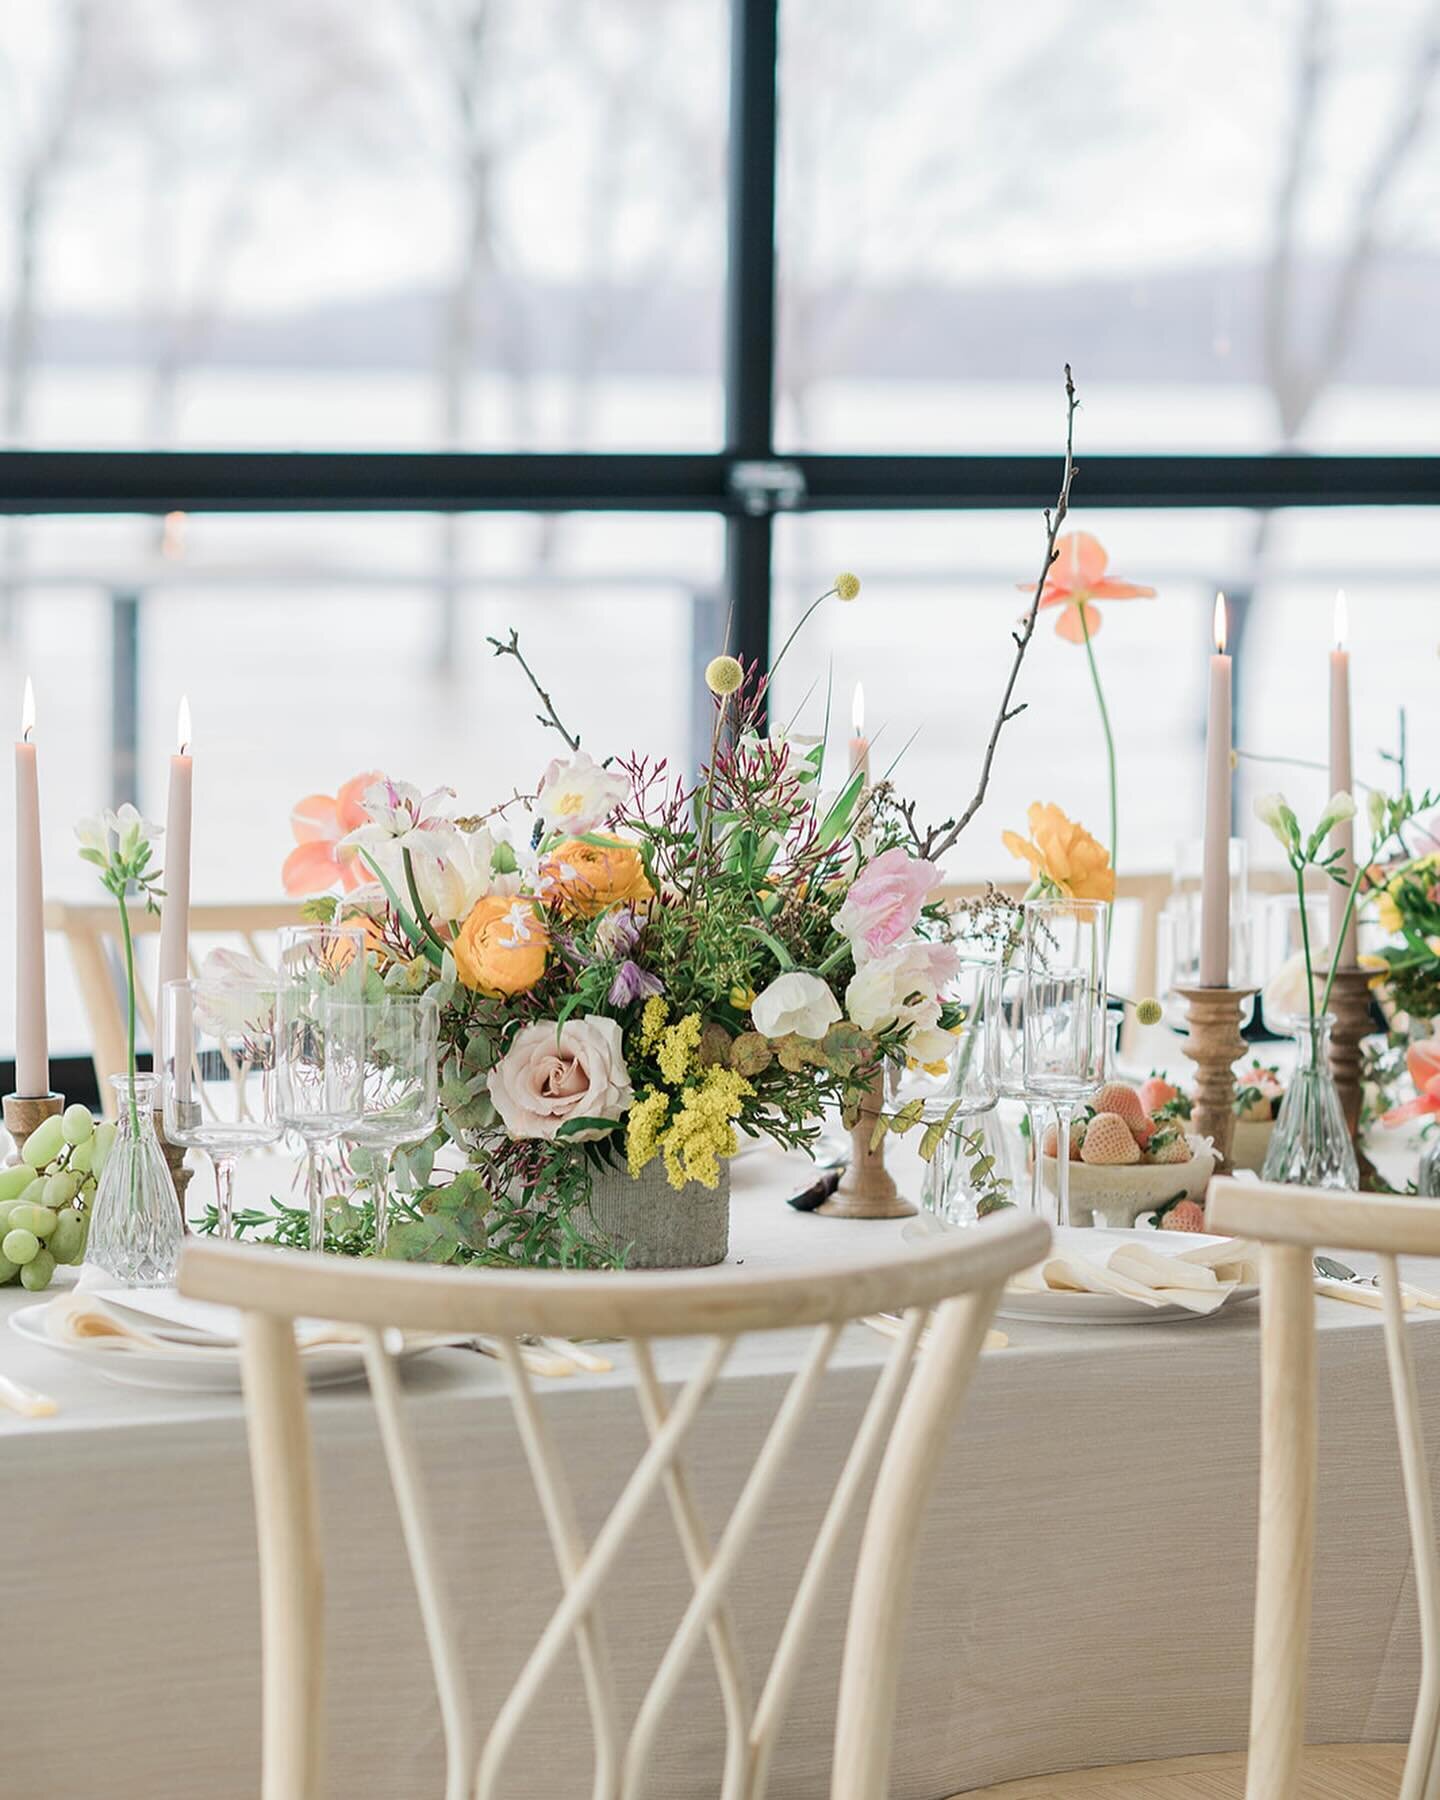 @maisiesnyderphoto took these pics of a very Springy table scape we set @wireeventcenter recently. Happy Spring! We did it!! 🌷🐣
Planning by @elevatedeventsbysm